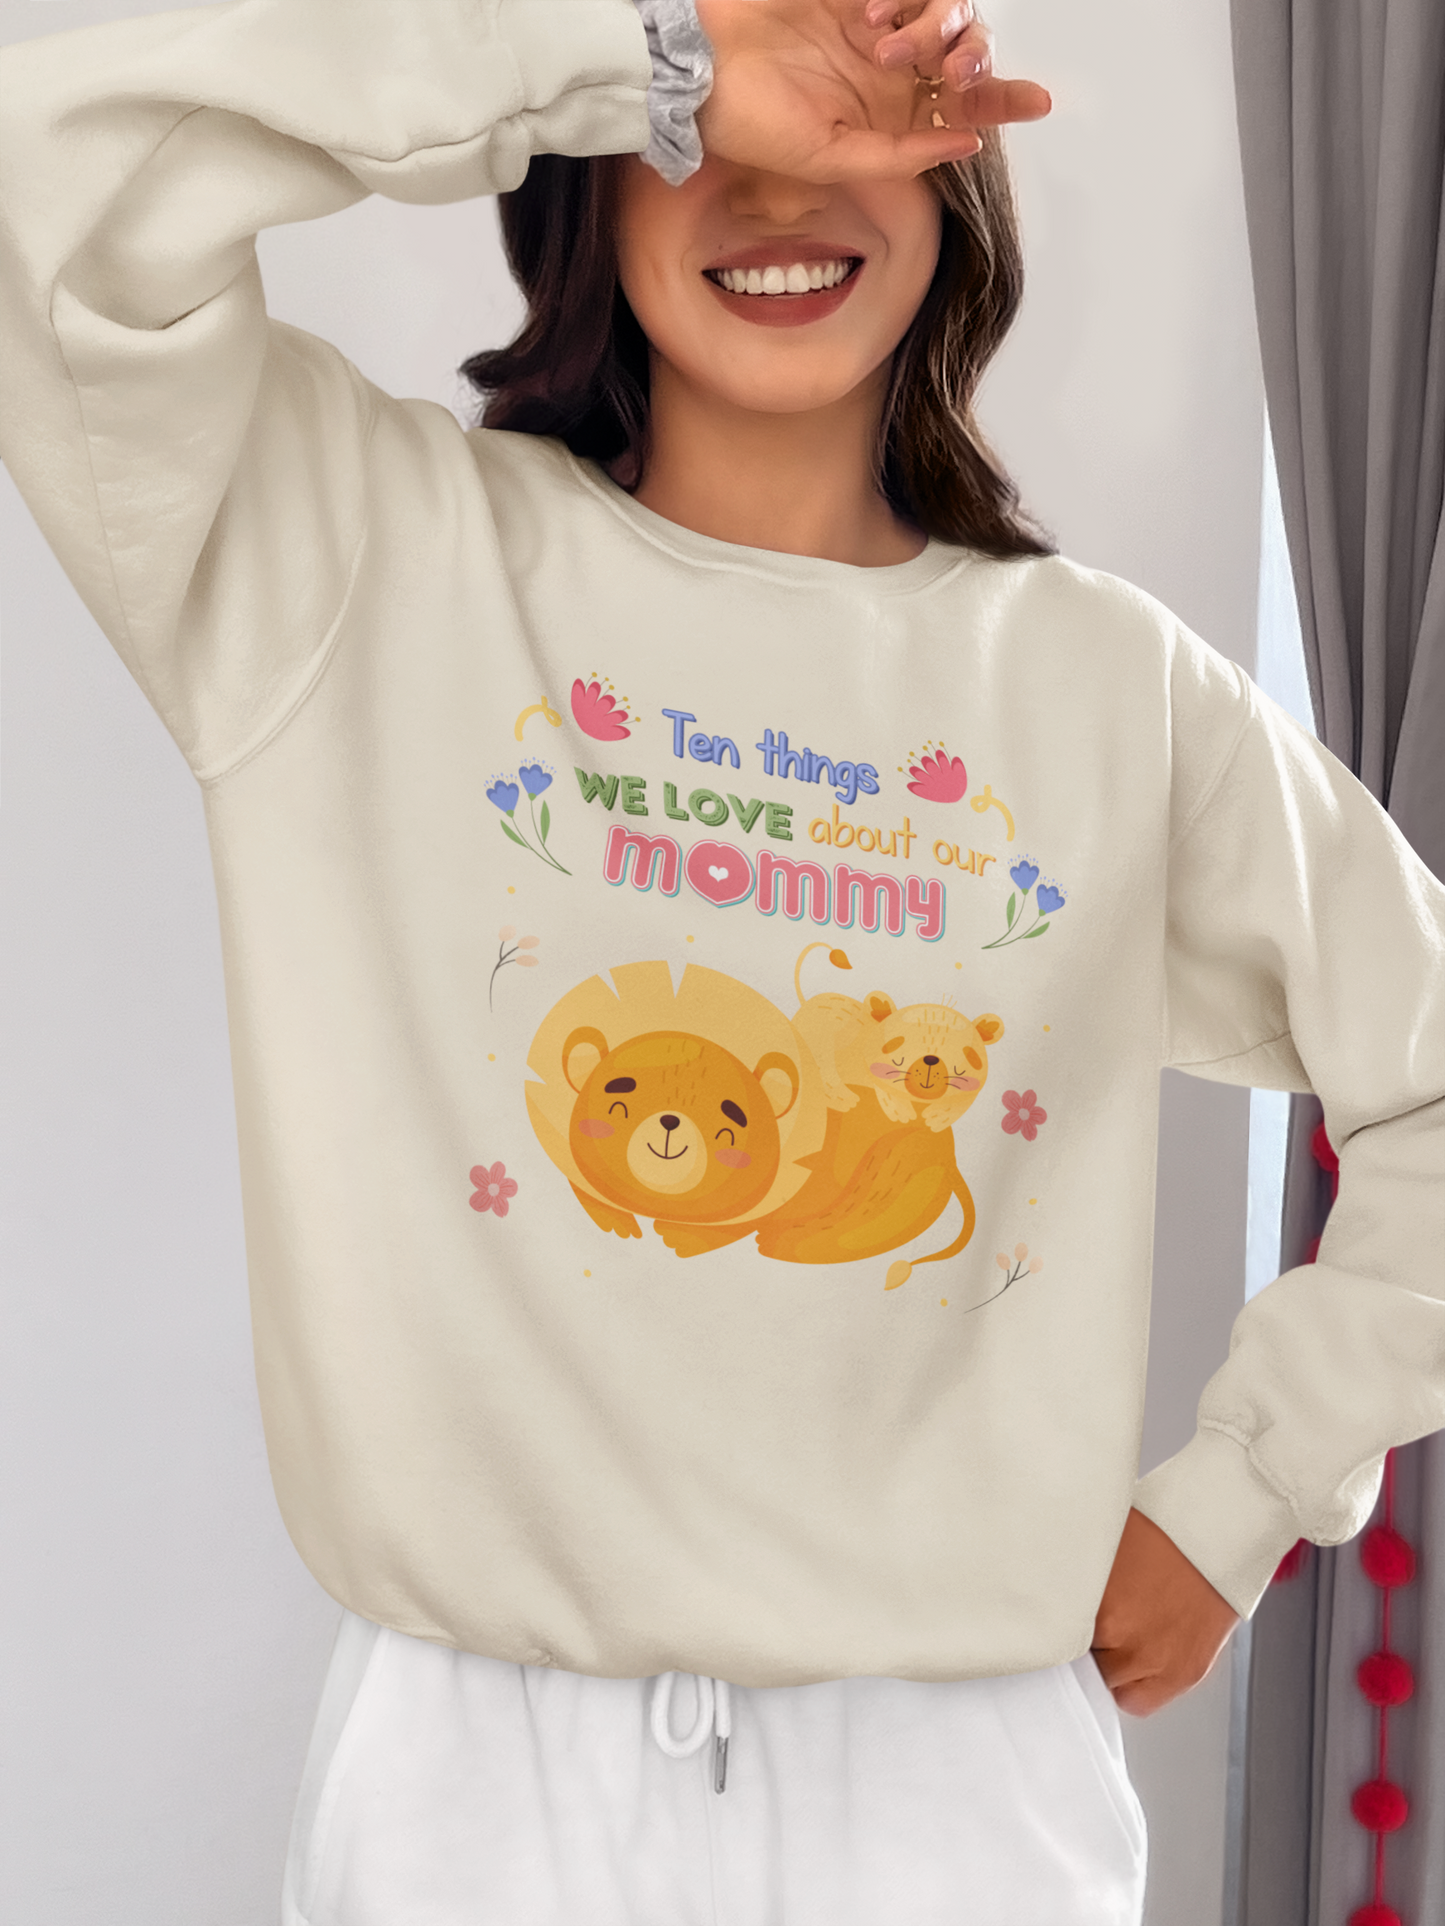 Personalized Ten Things We Love About Our Mommy, Customized Cute Clipart Shirt, Unique Mother's Day Shirt